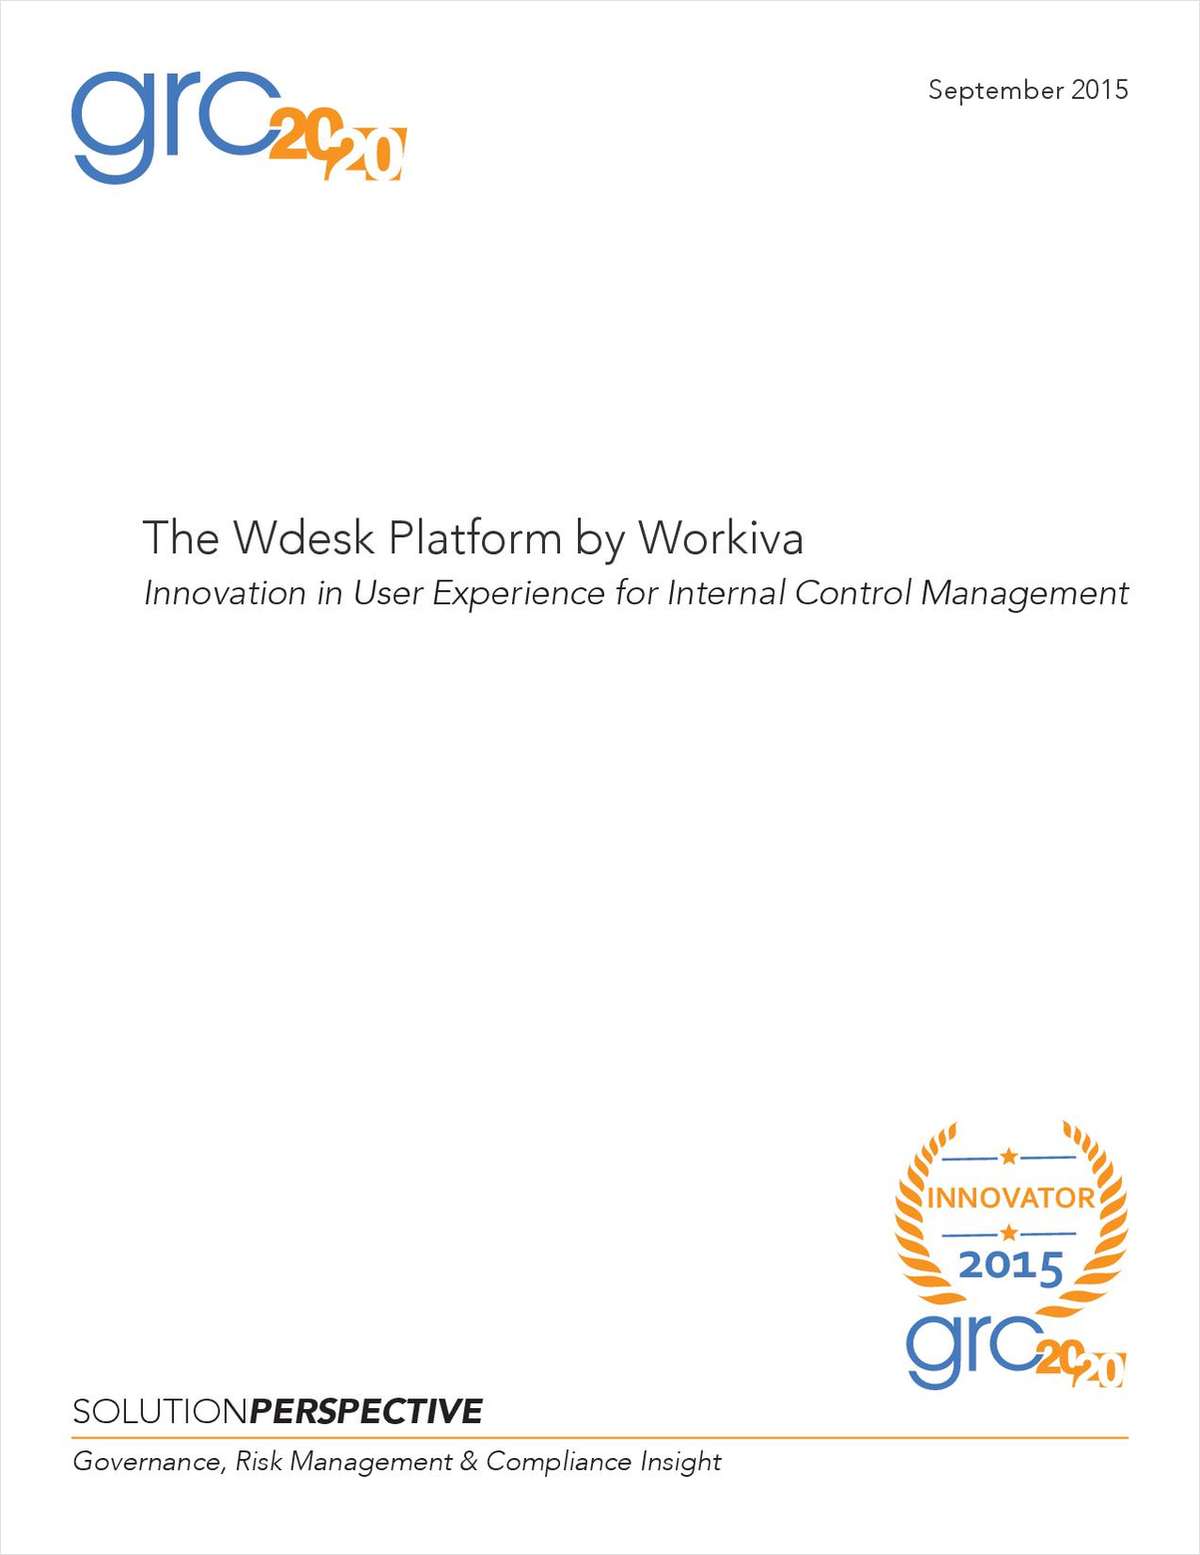 The Wdesk Platform by Workiva: Innovation in User Experience for Internal Control Management